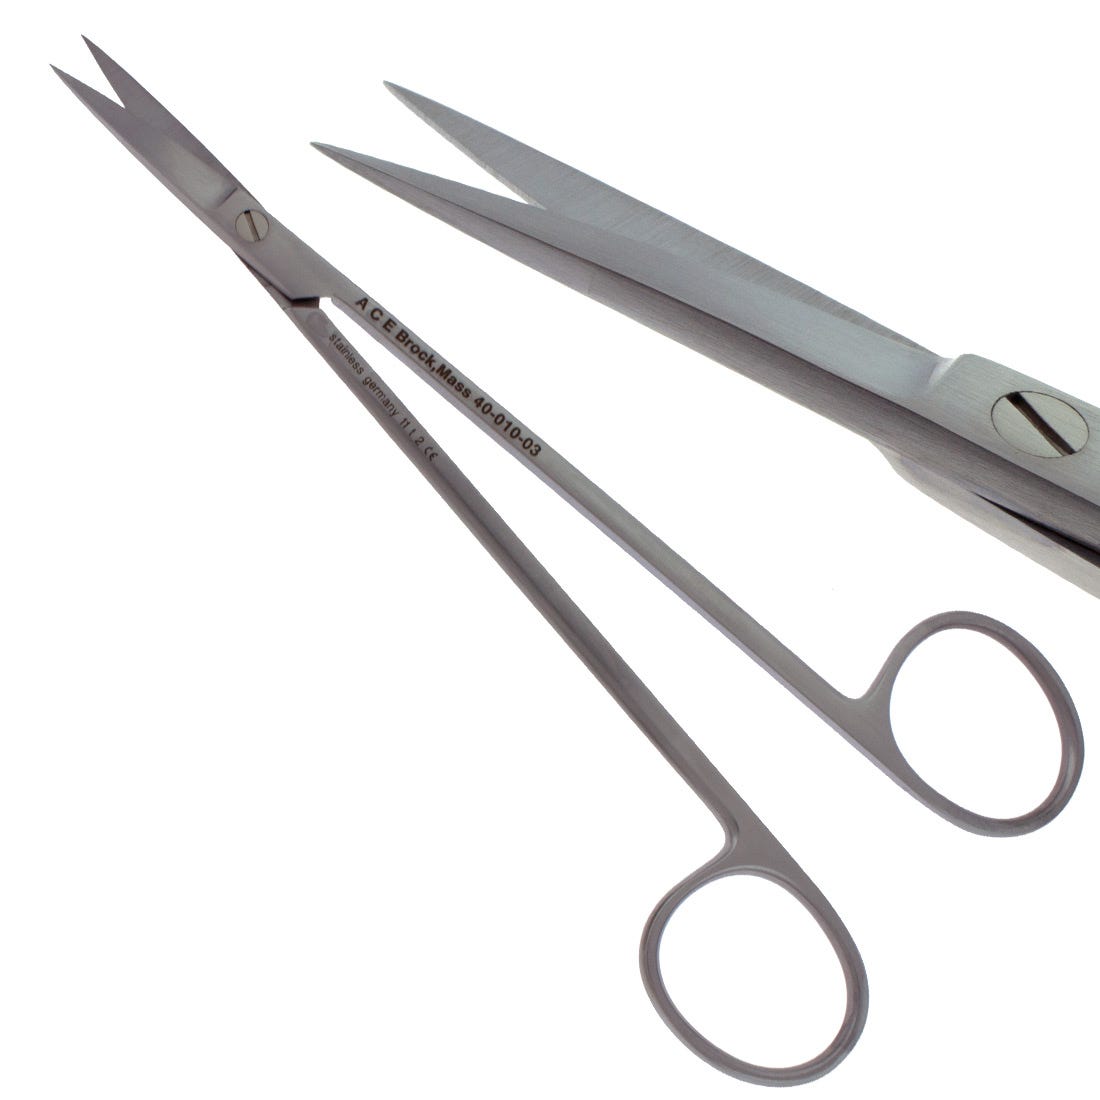 ACE #2 Kelly Scissors, straight, smooth blades